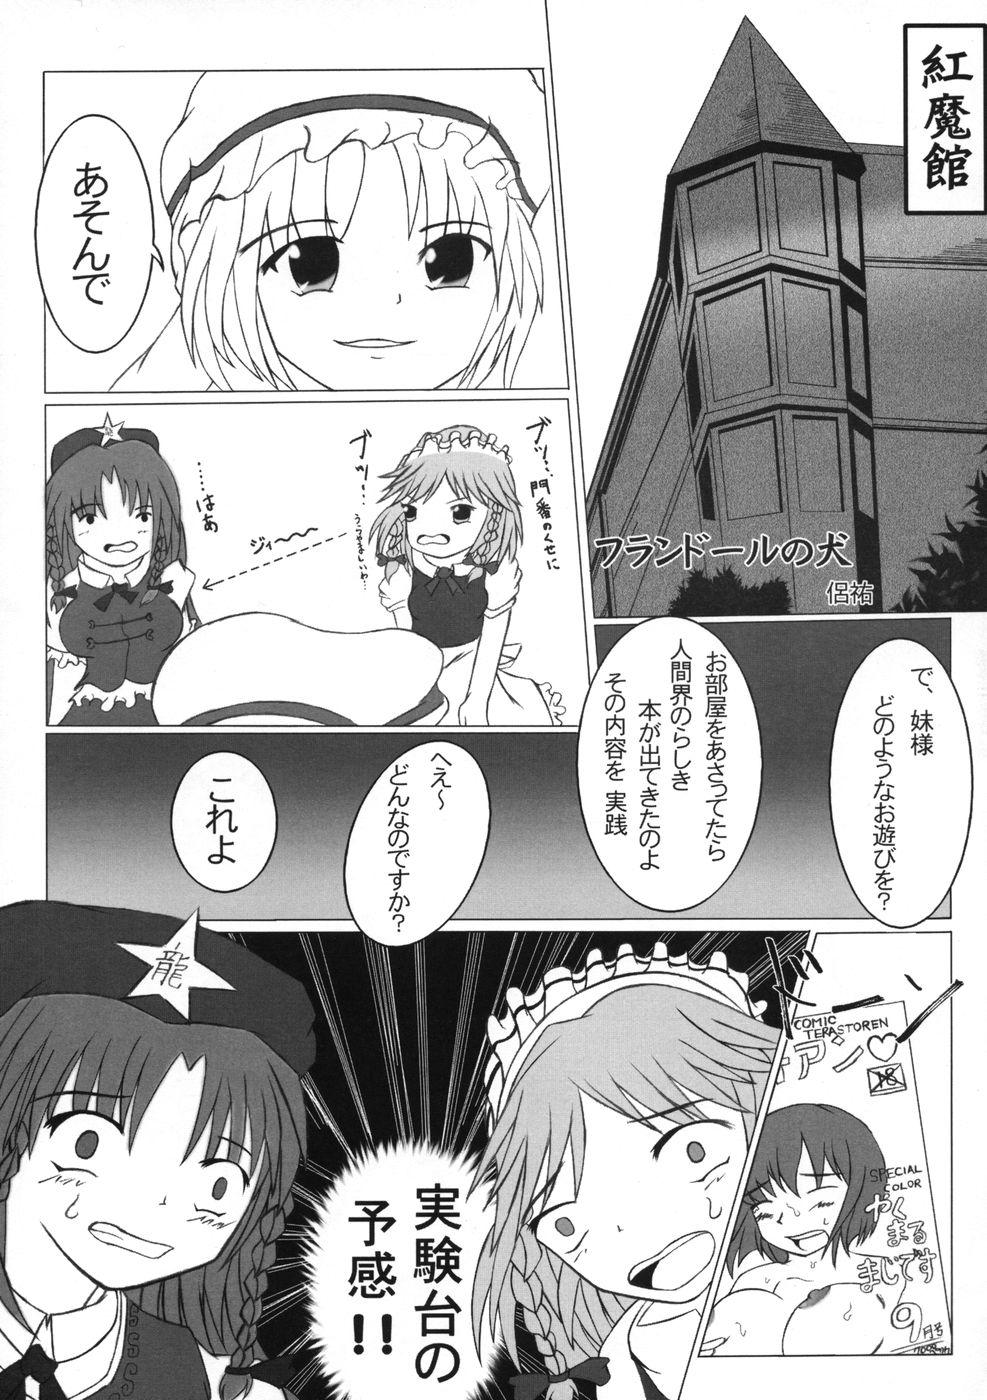 Porn Pussy 業創りし風 - Touhou project Hot Naked Girl - Page 5